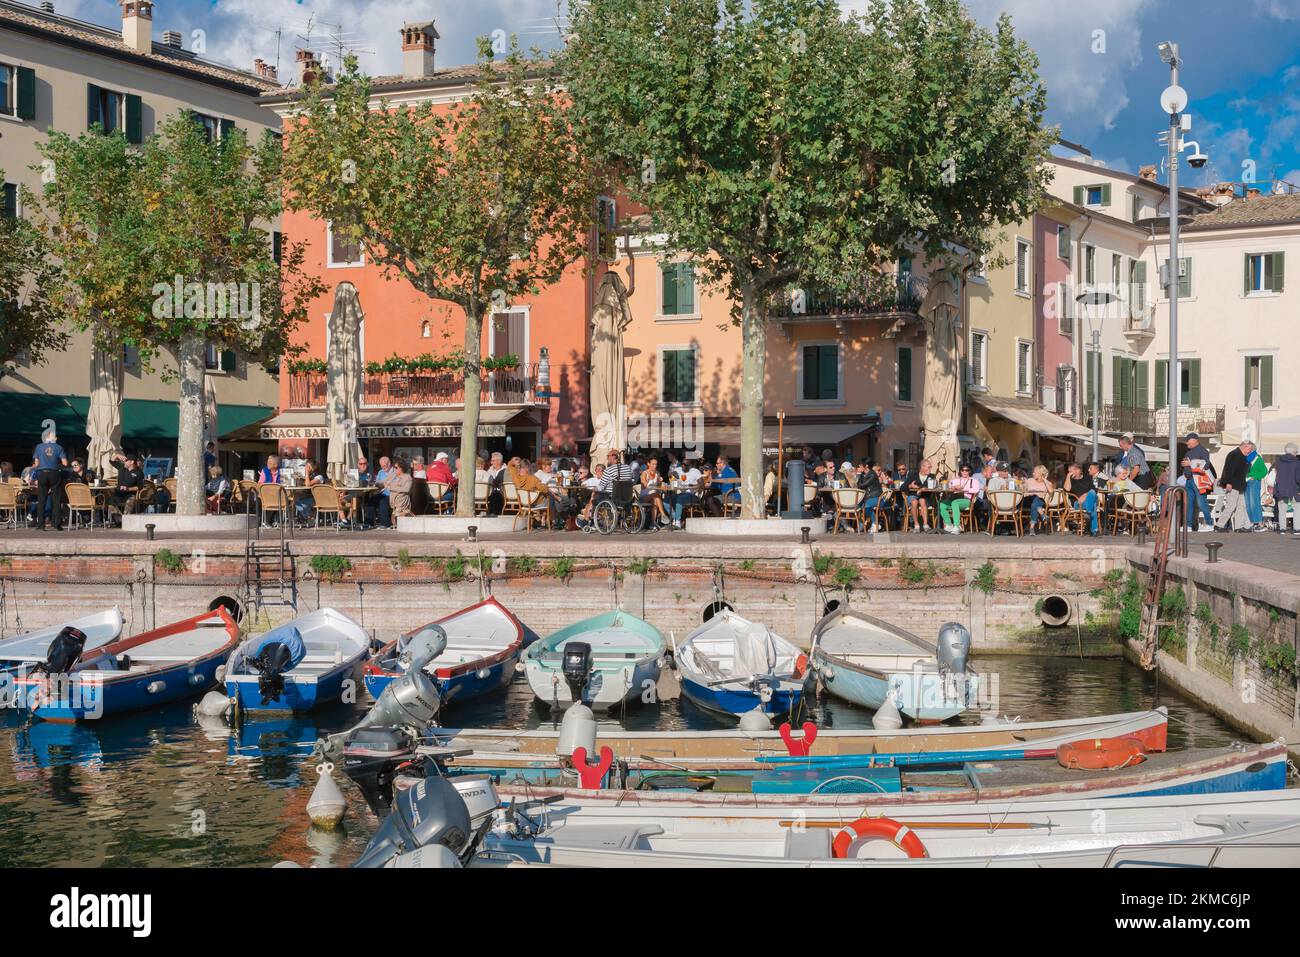 Garda Lake Garda, view in summer of people seated outside cafes and bars in the Piazza Catullo in the old town waterfront area of Garda town, Italy Stock Photo